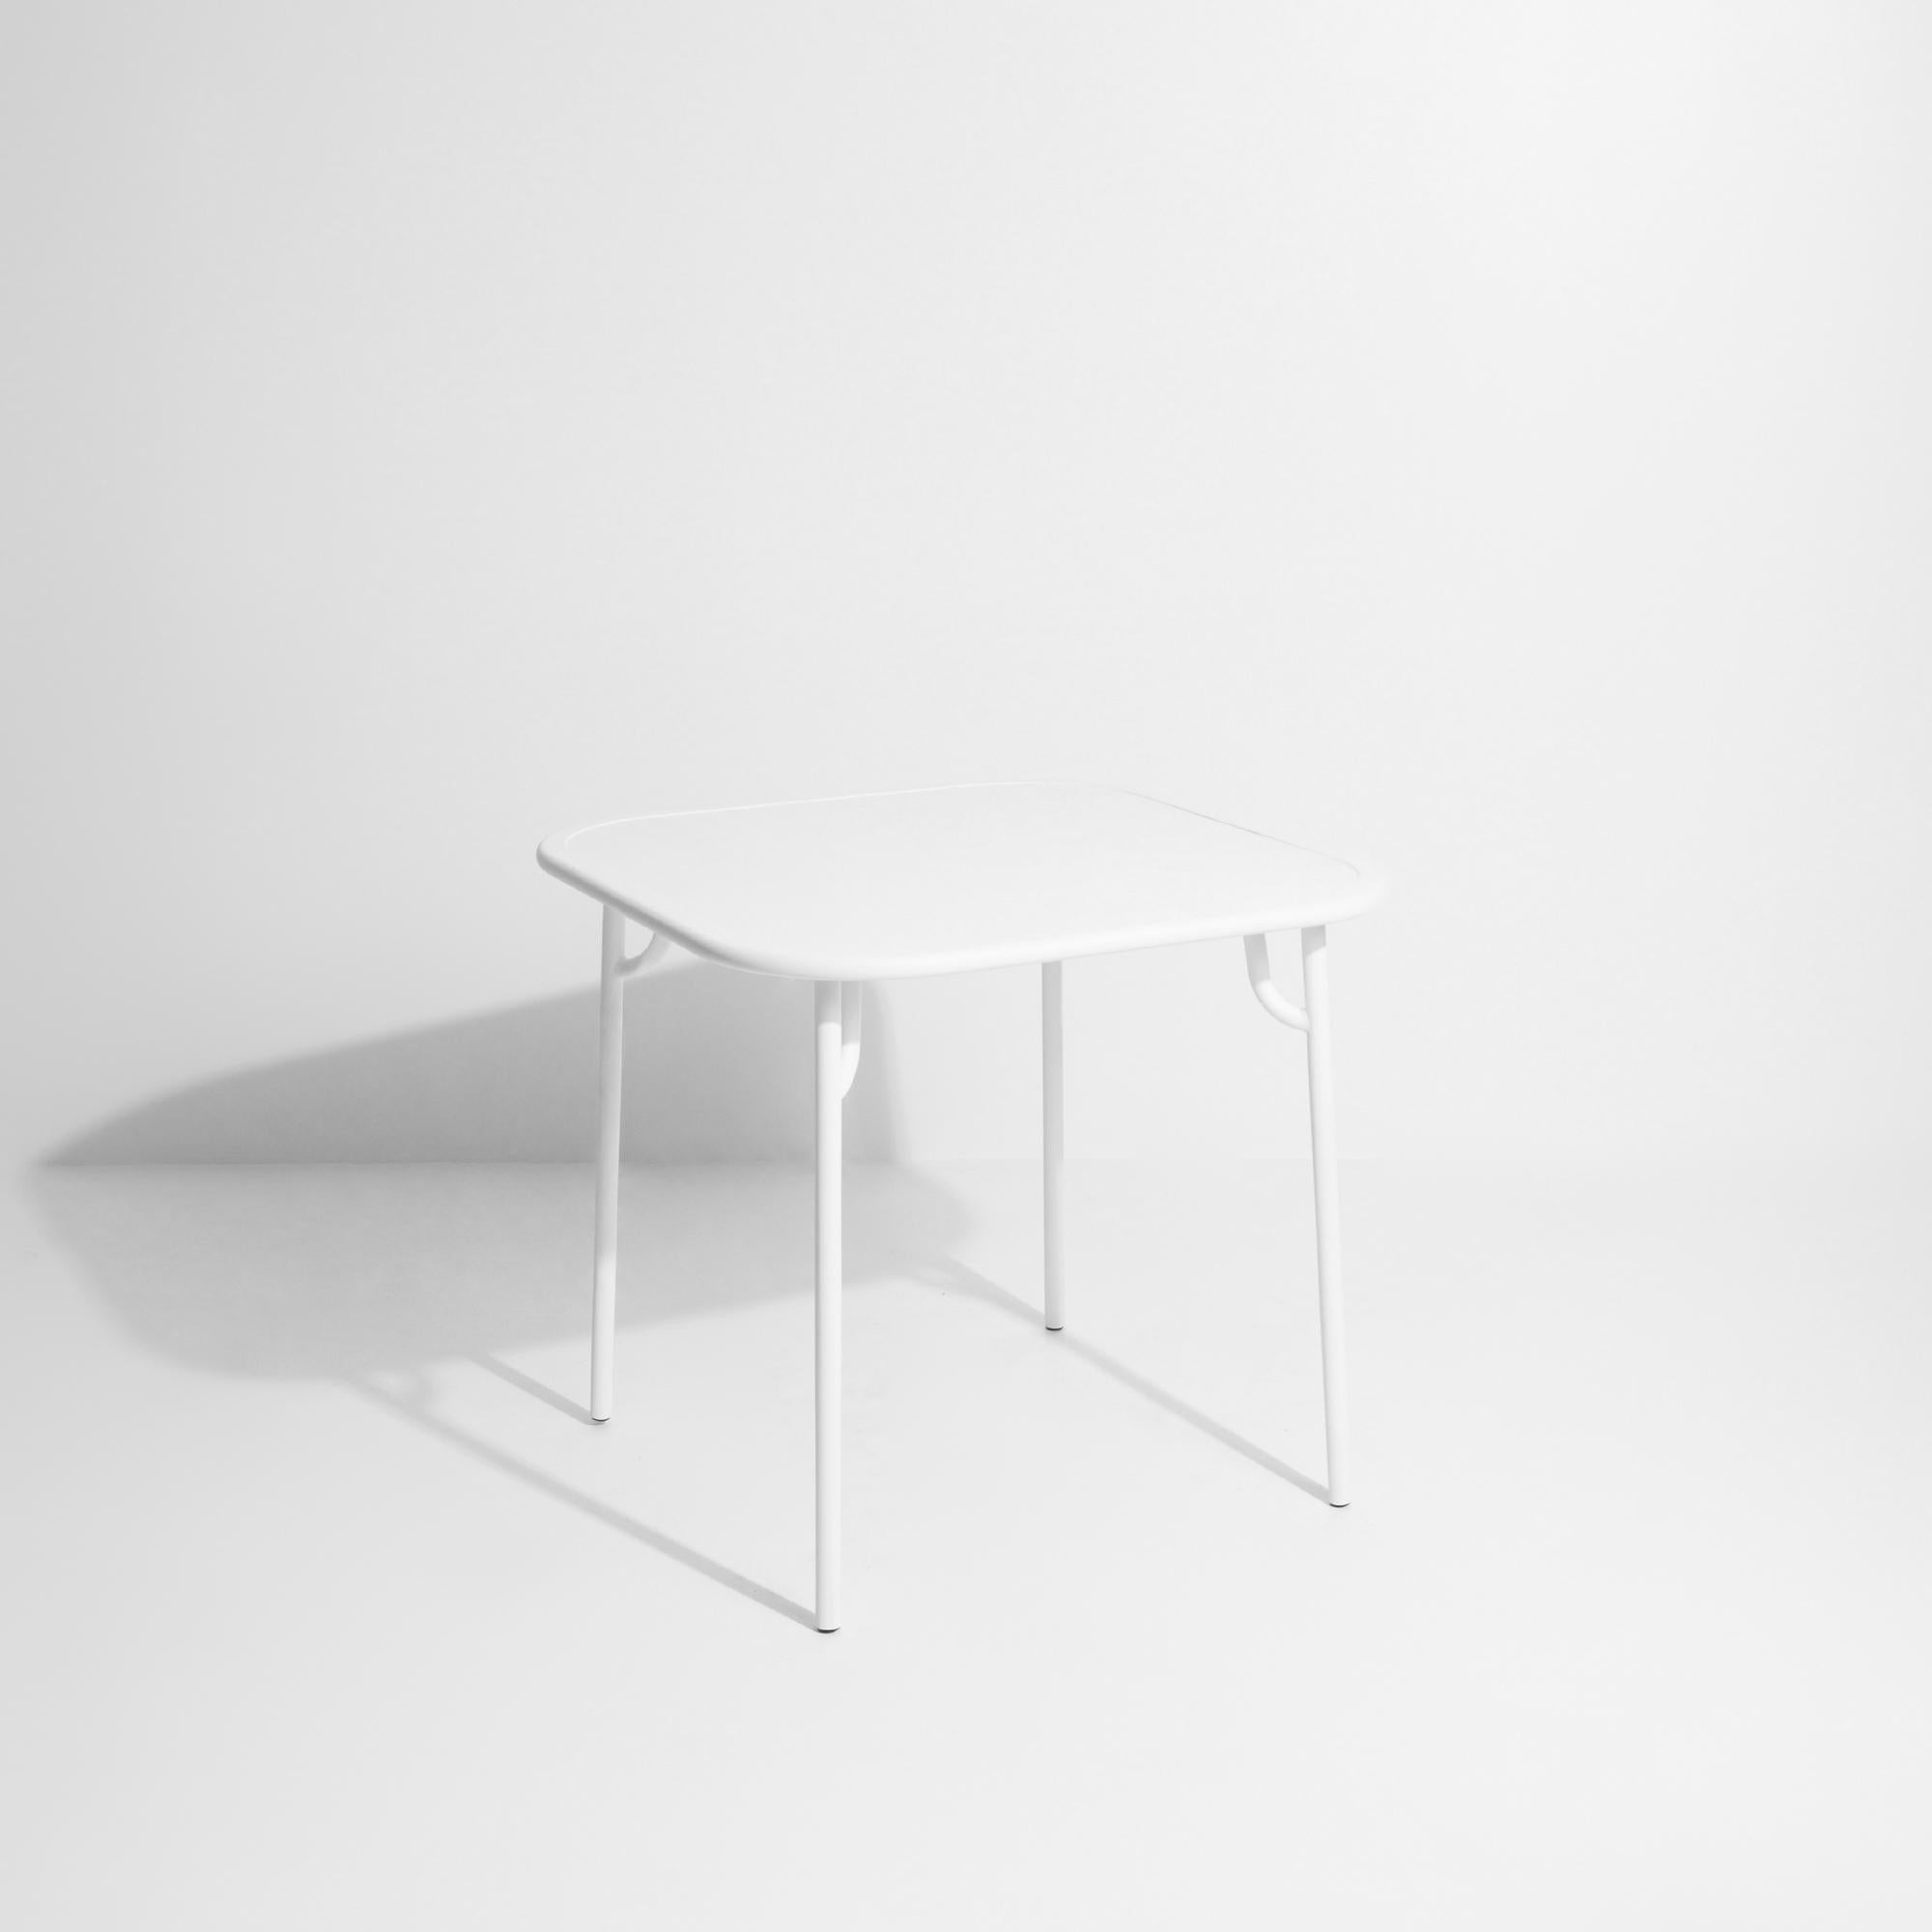 Chinese Petite Friture Week-End Plain Square Dining Table in White Aluminium, 2017 For Sale